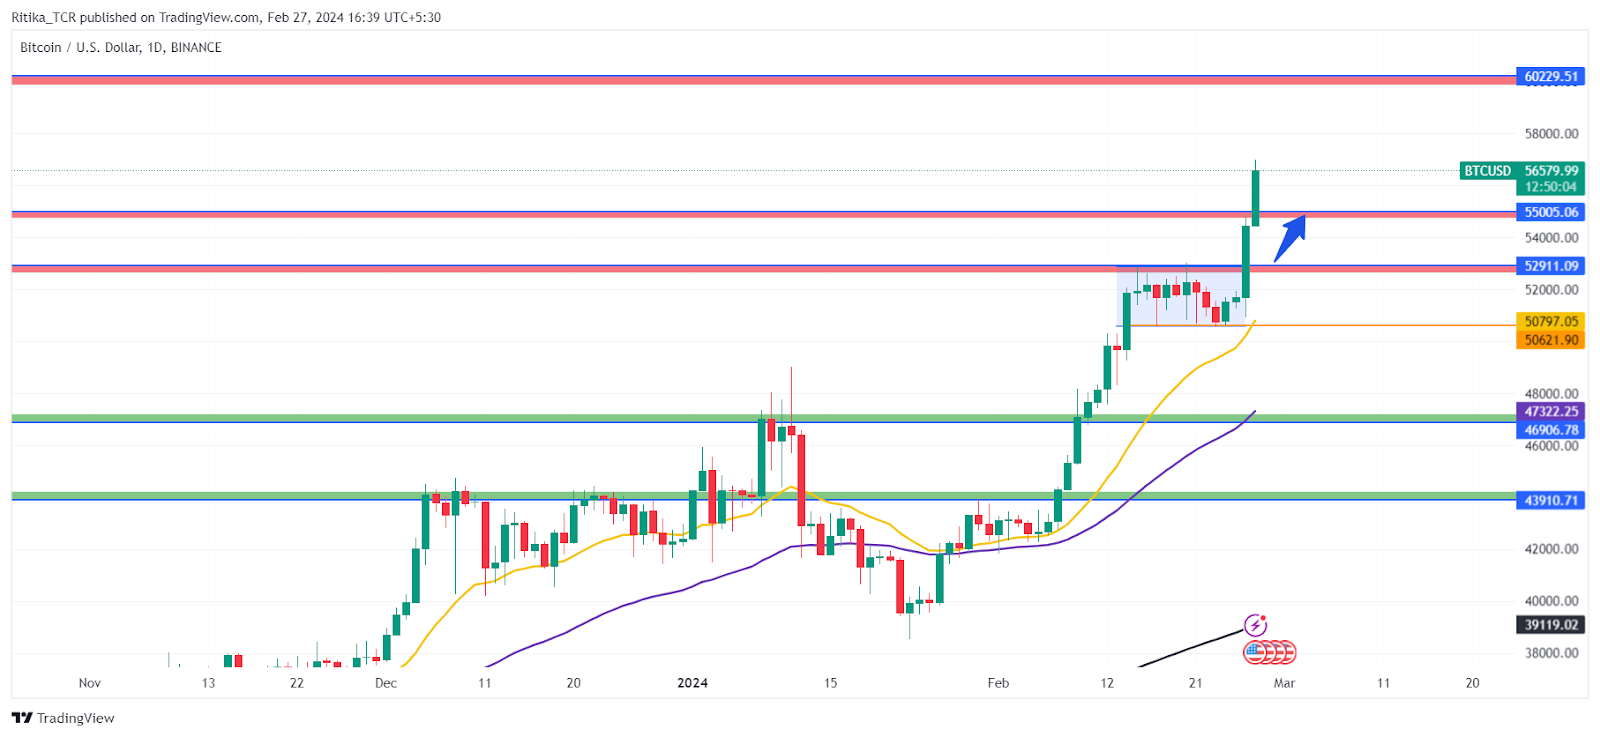 BTC Papalapit na sa 60K, ETH Conquers 3K: What's Driving The Growth?